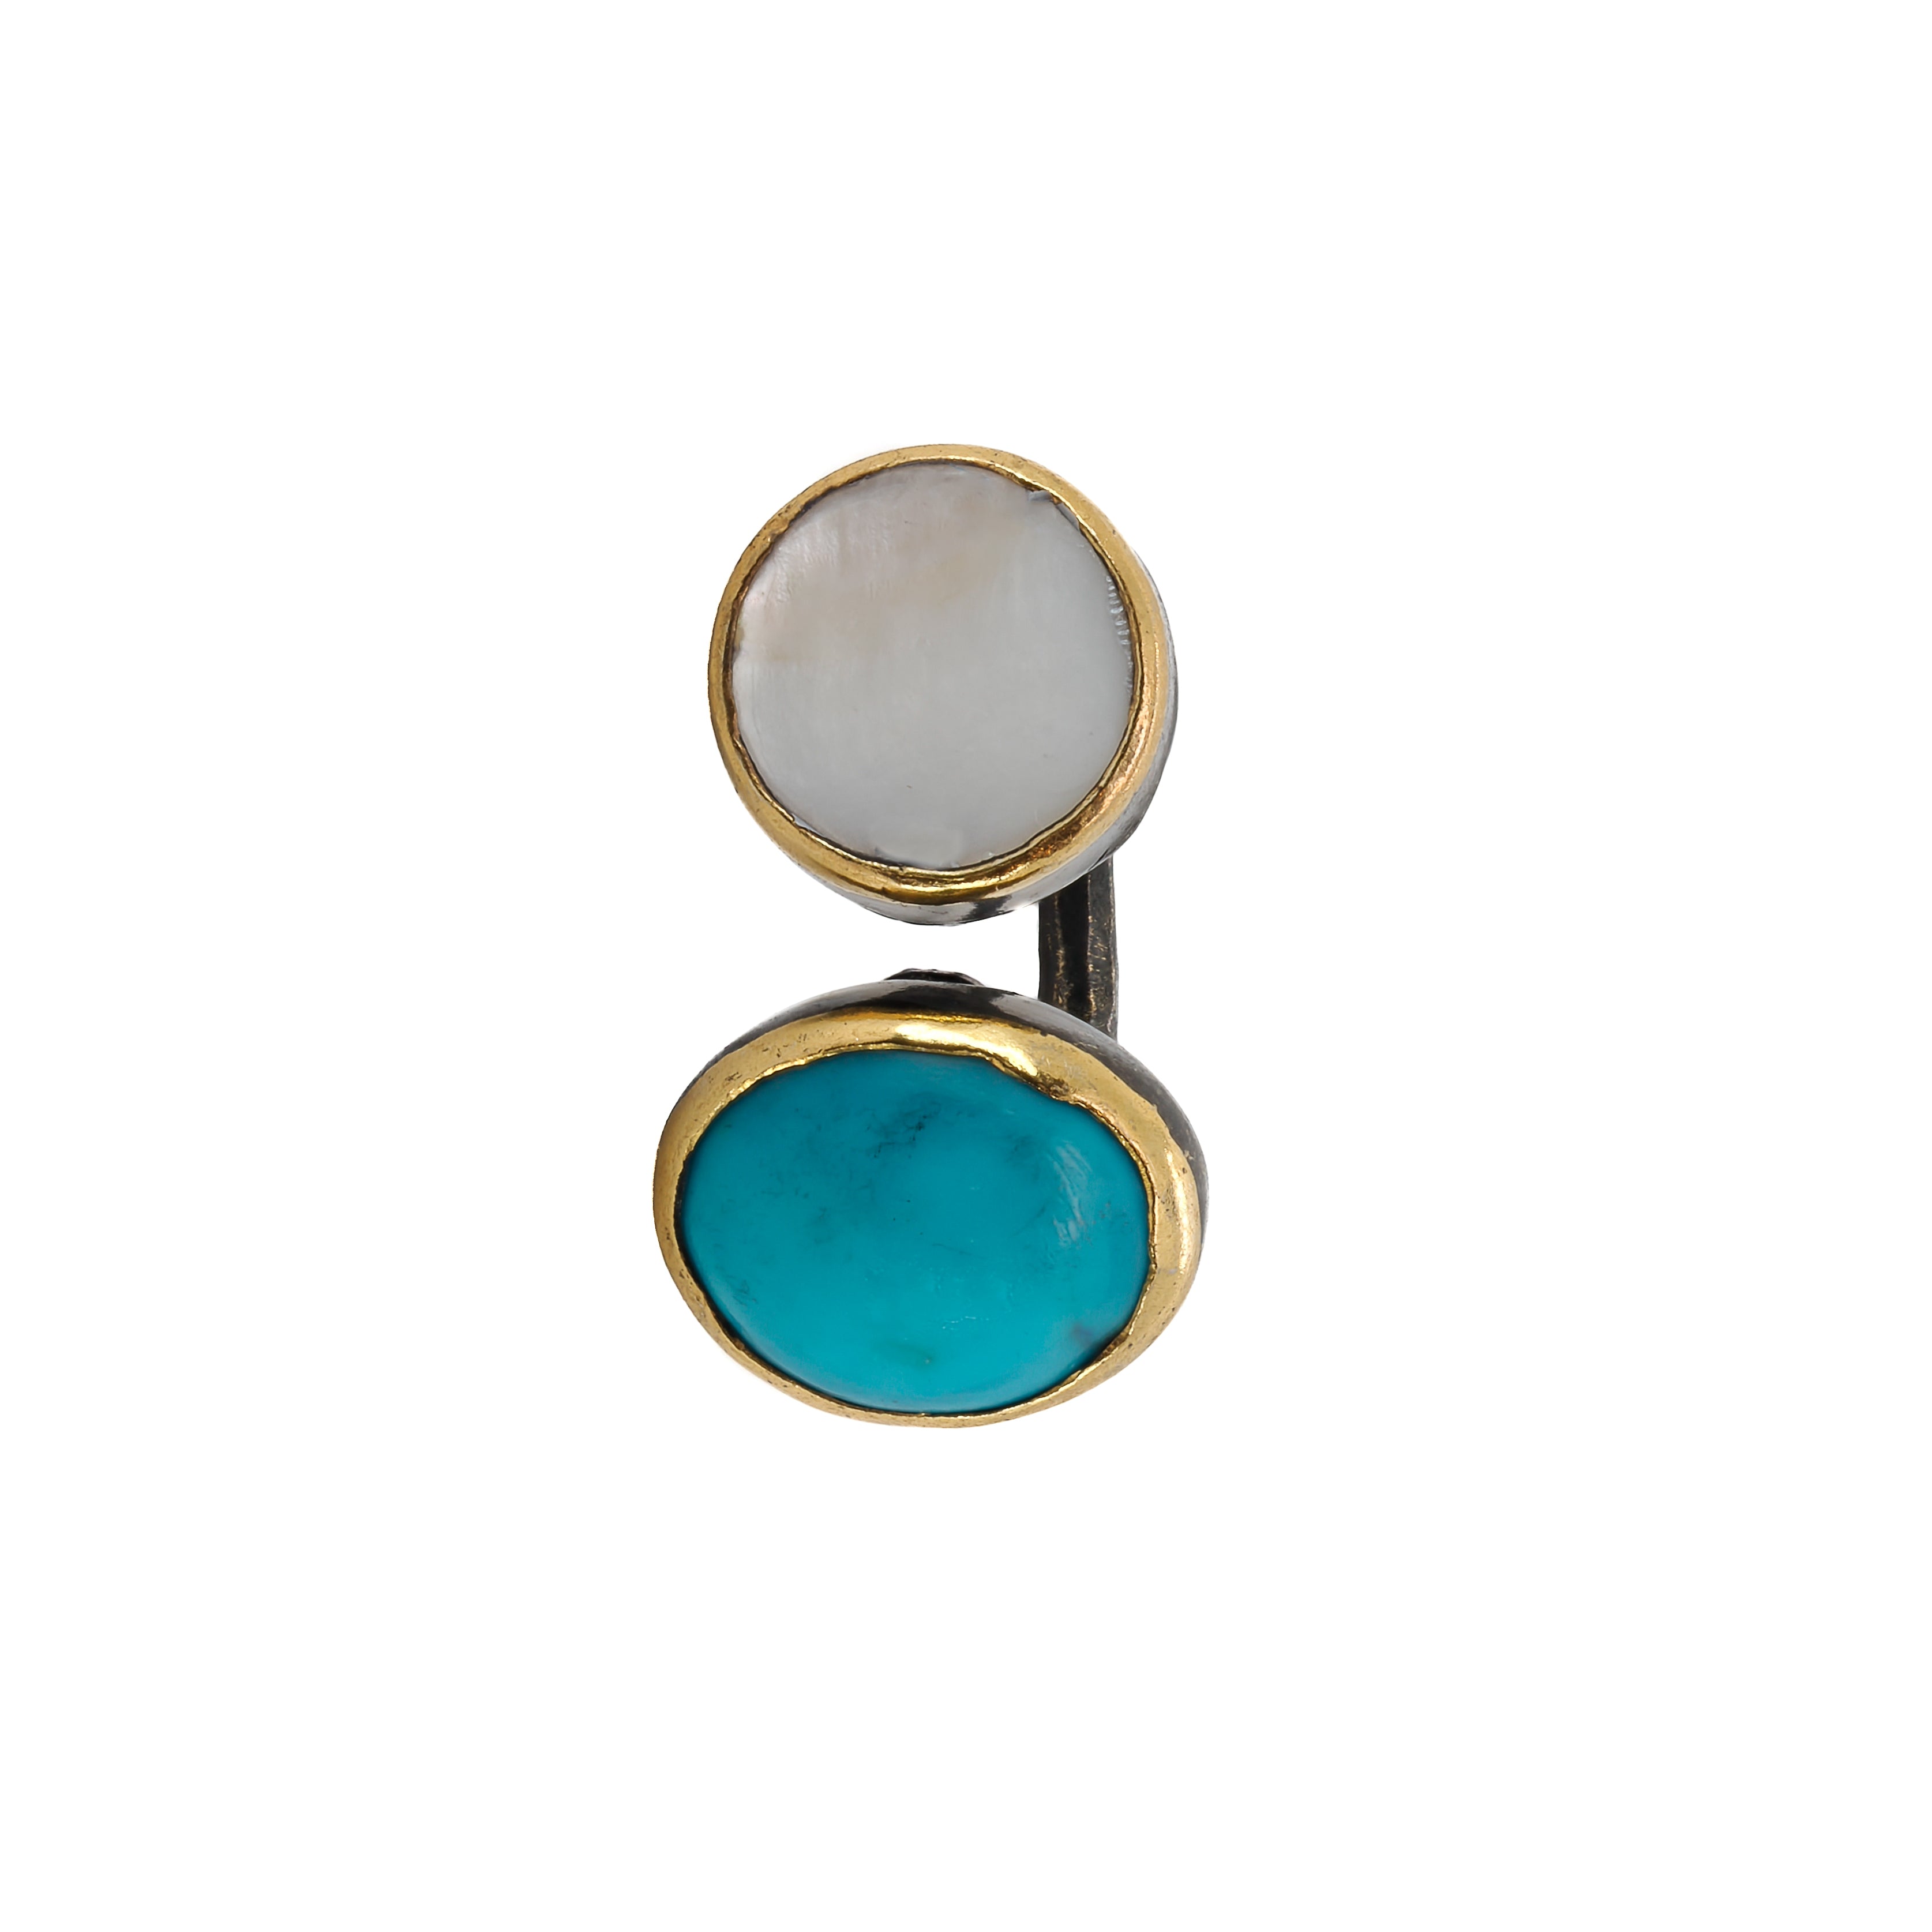 A closer look at the graceful synergy of Pearl and Turquoise in the ring's centerpiece.